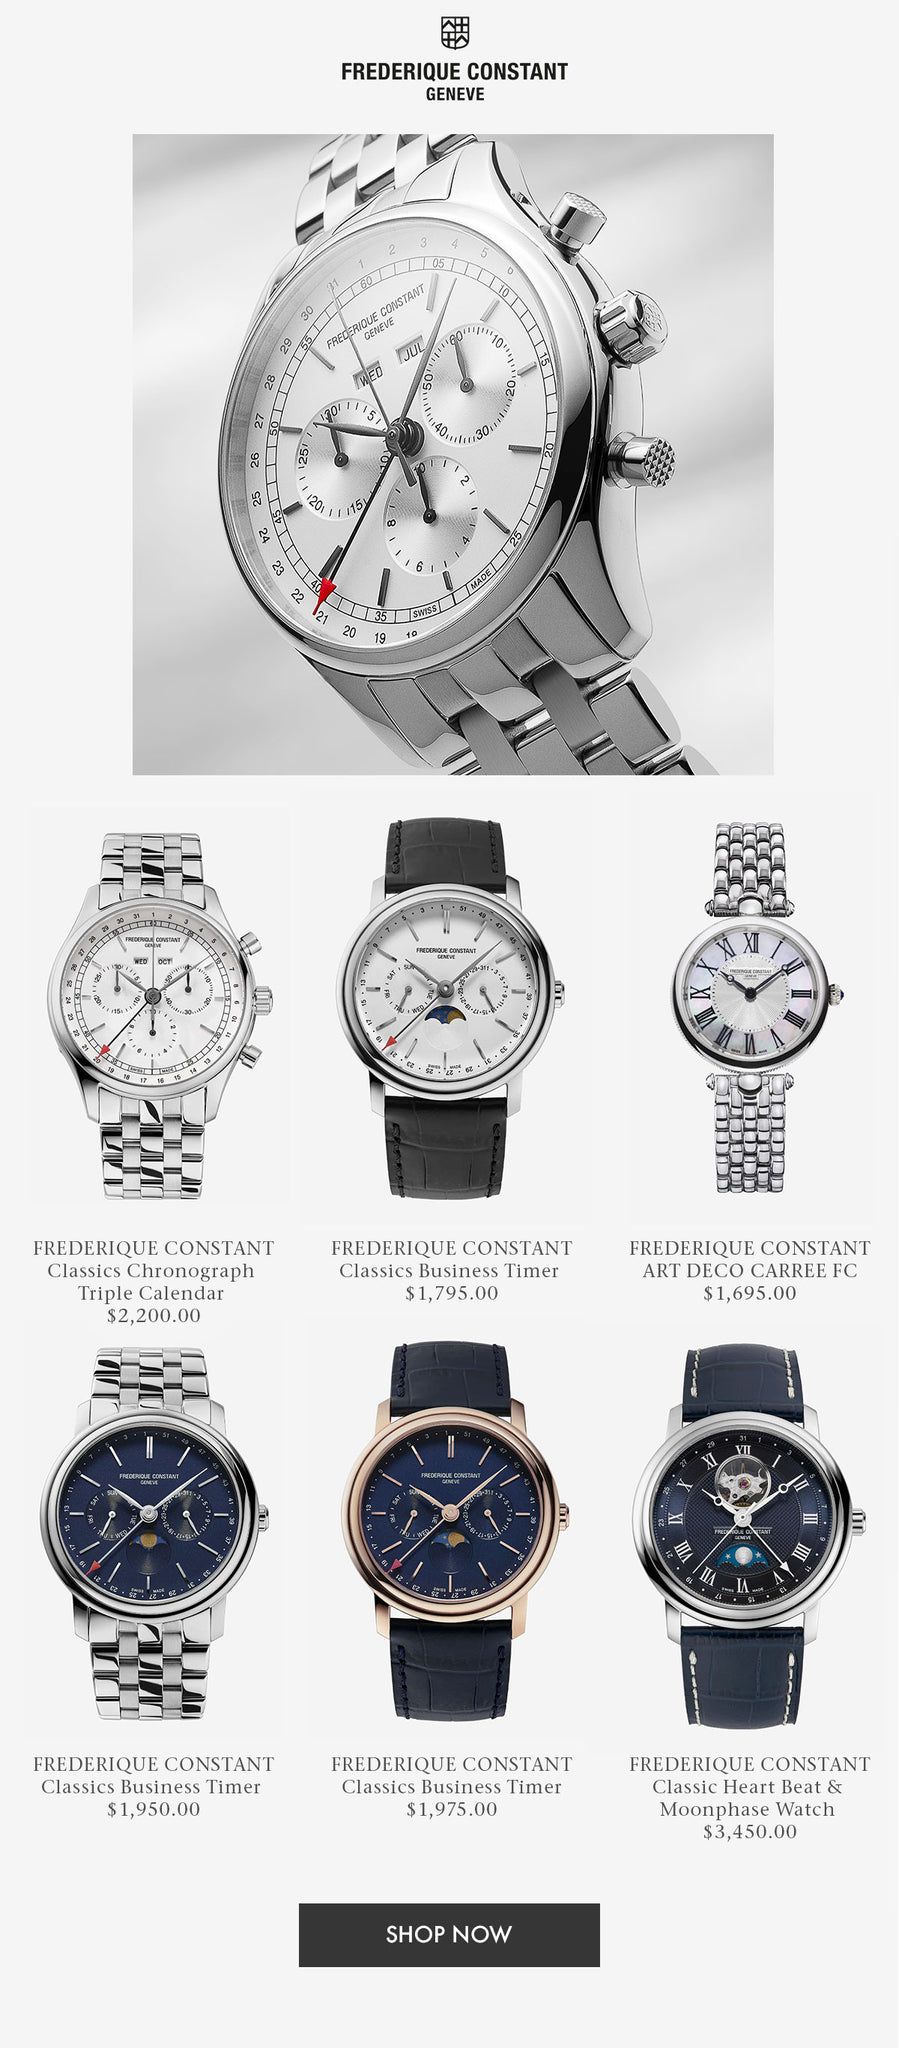 New watches from Frederique Constant